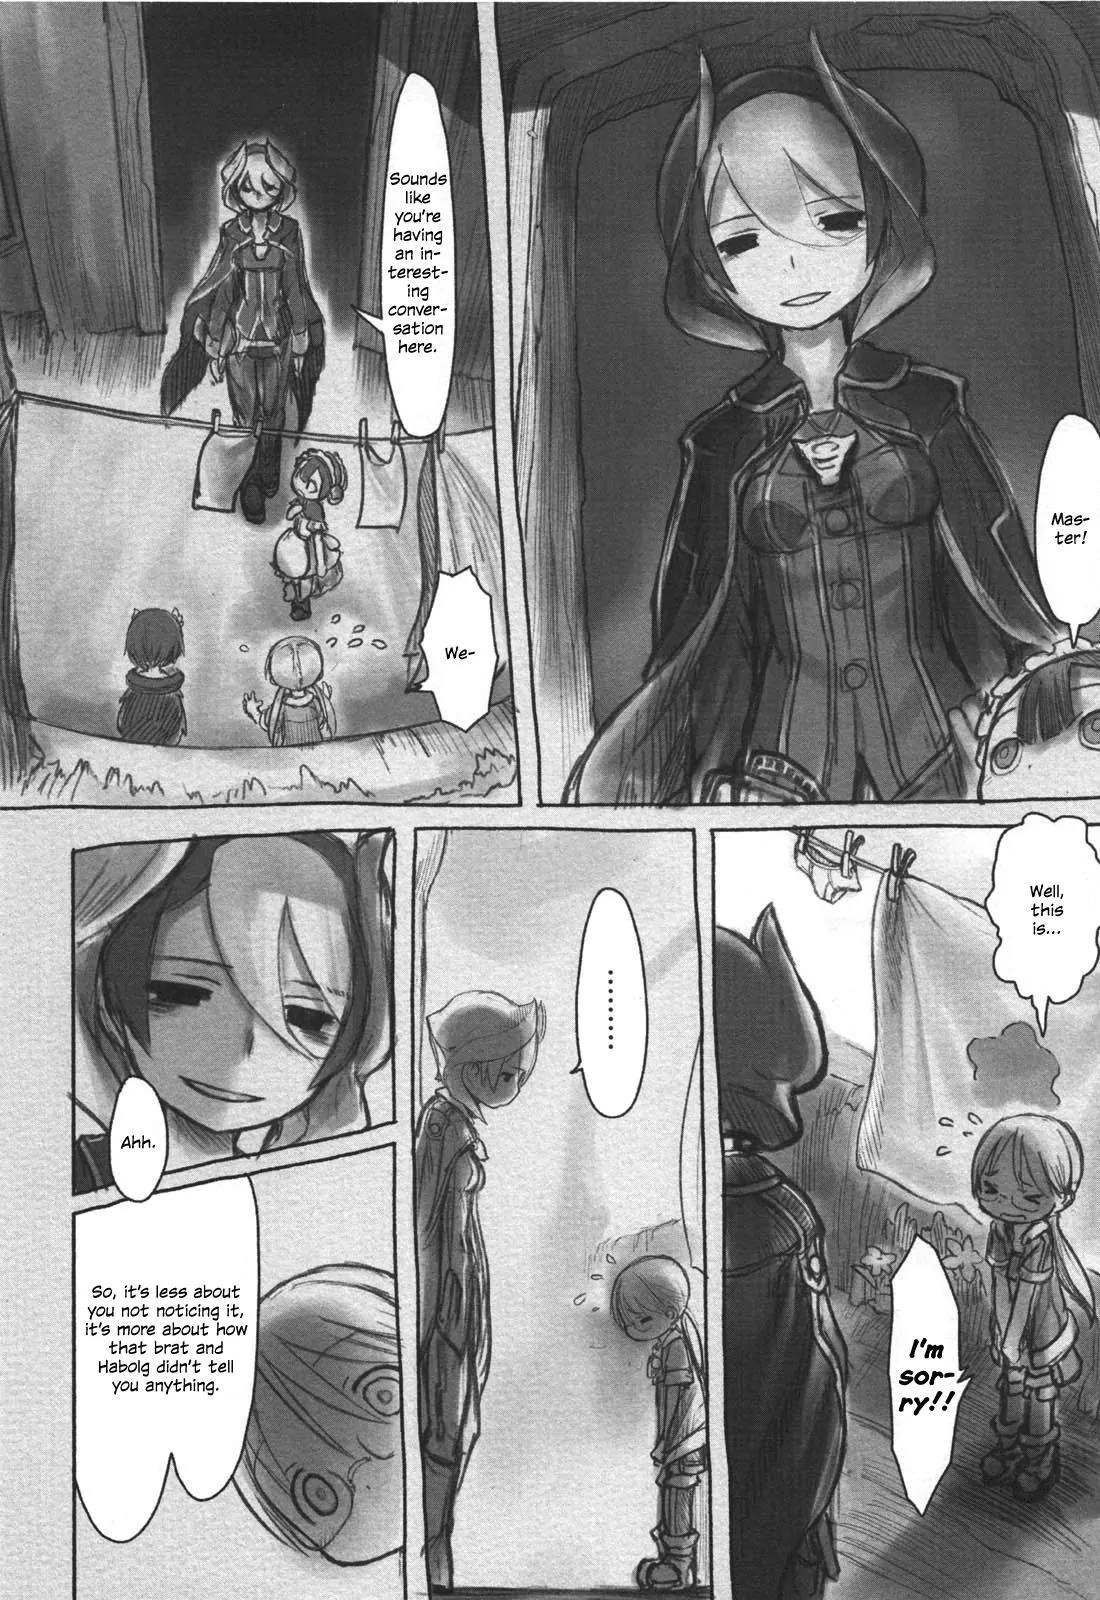 Chapter 14 !!!TW!!!, Author: Akihito Tsukushi, site: made-in-abyss-m